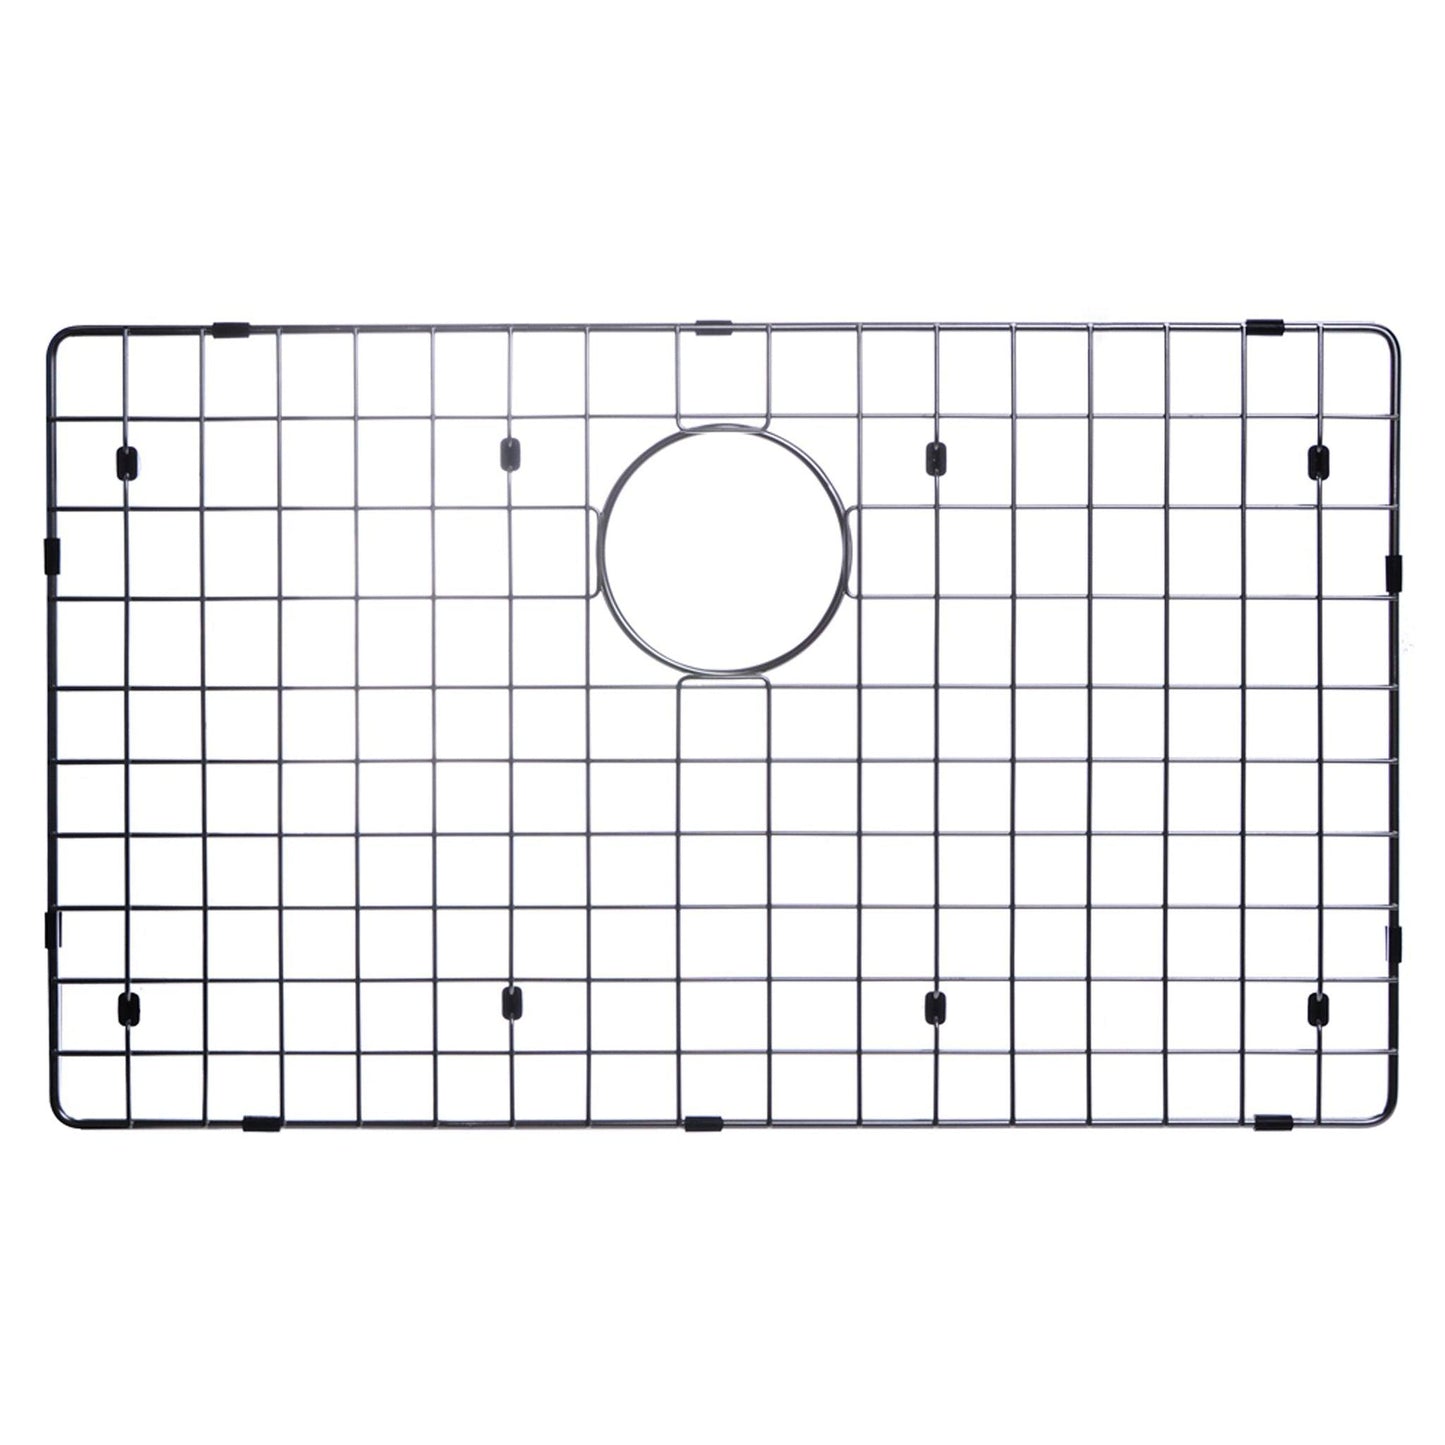 Water Creation Zero Radius Single Bowl Stainless Steel Hand Made Undermount 32 Inch X 19 Inch Sink With Drain, Strainer, And Bottom Grid